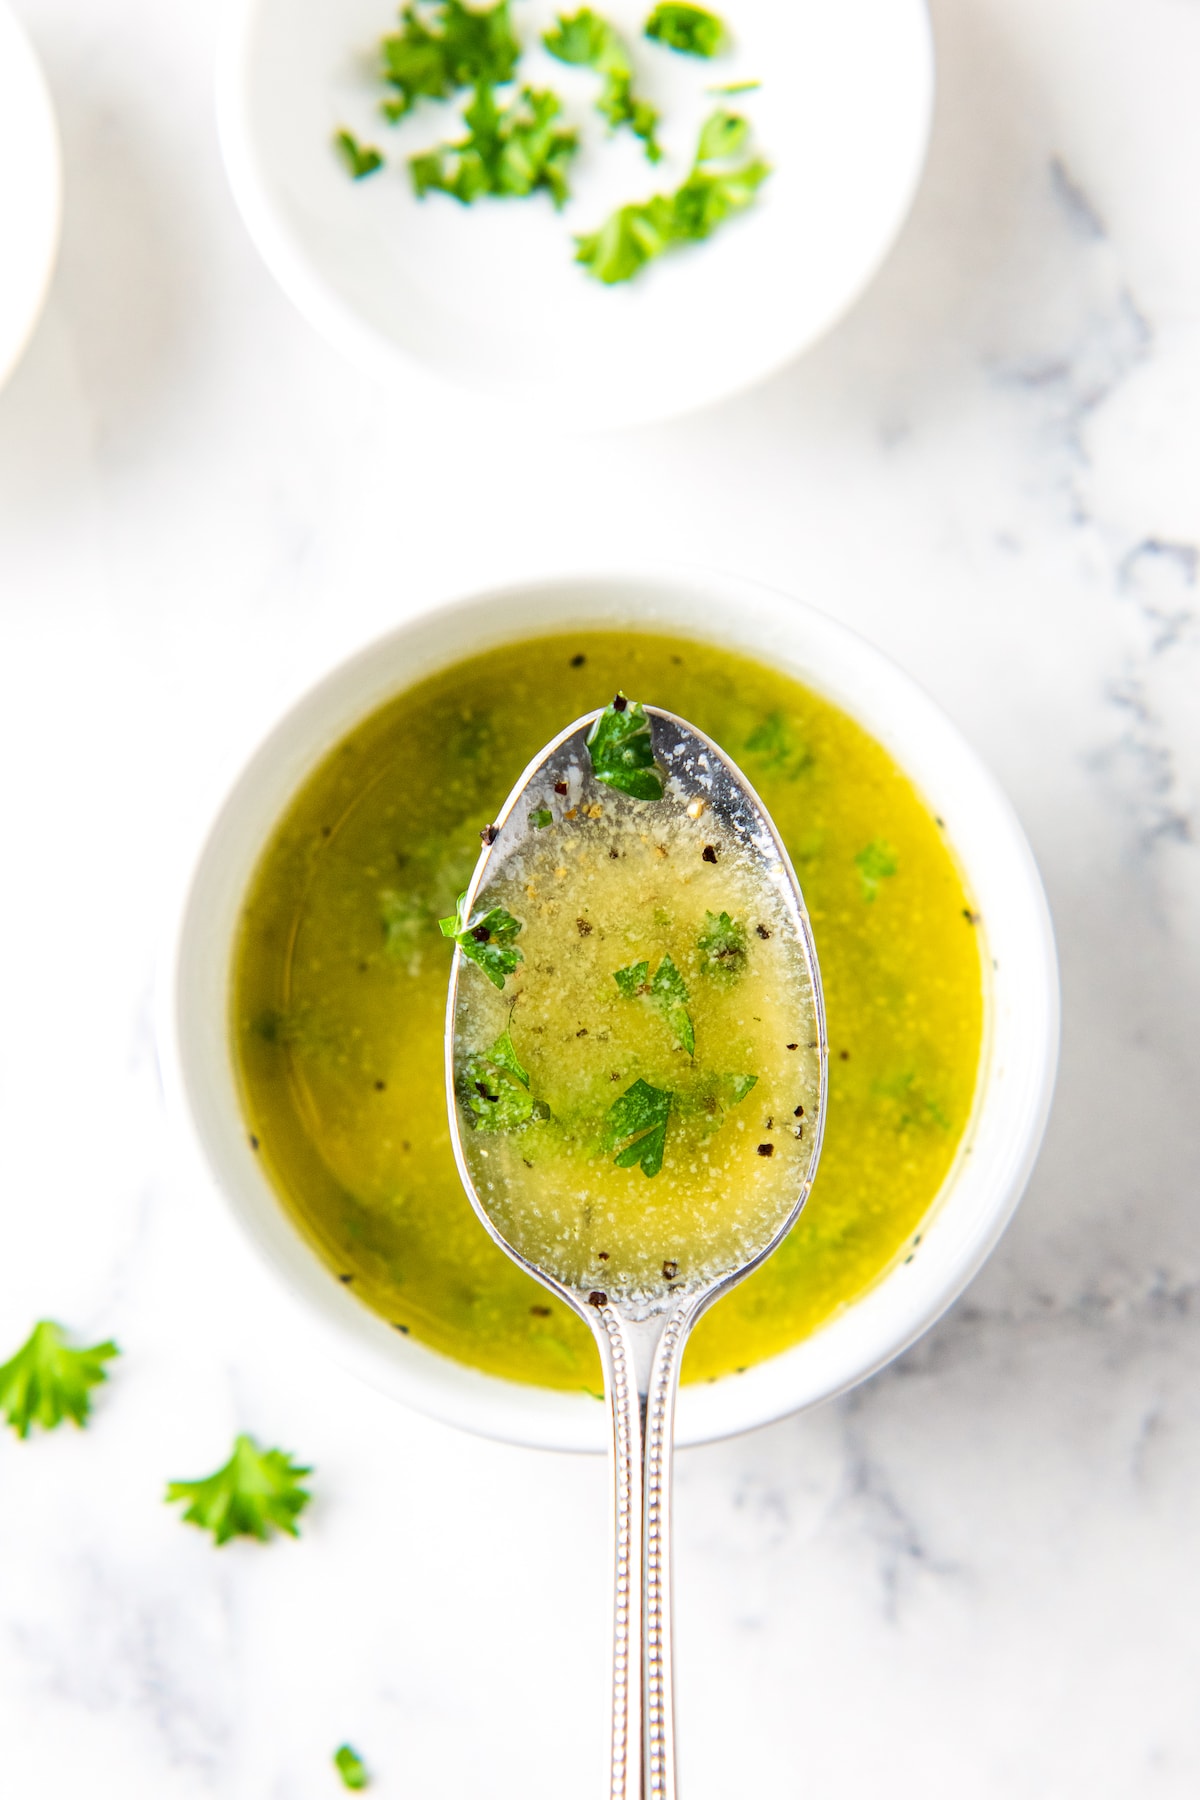 melted butter with seasonings and herbs